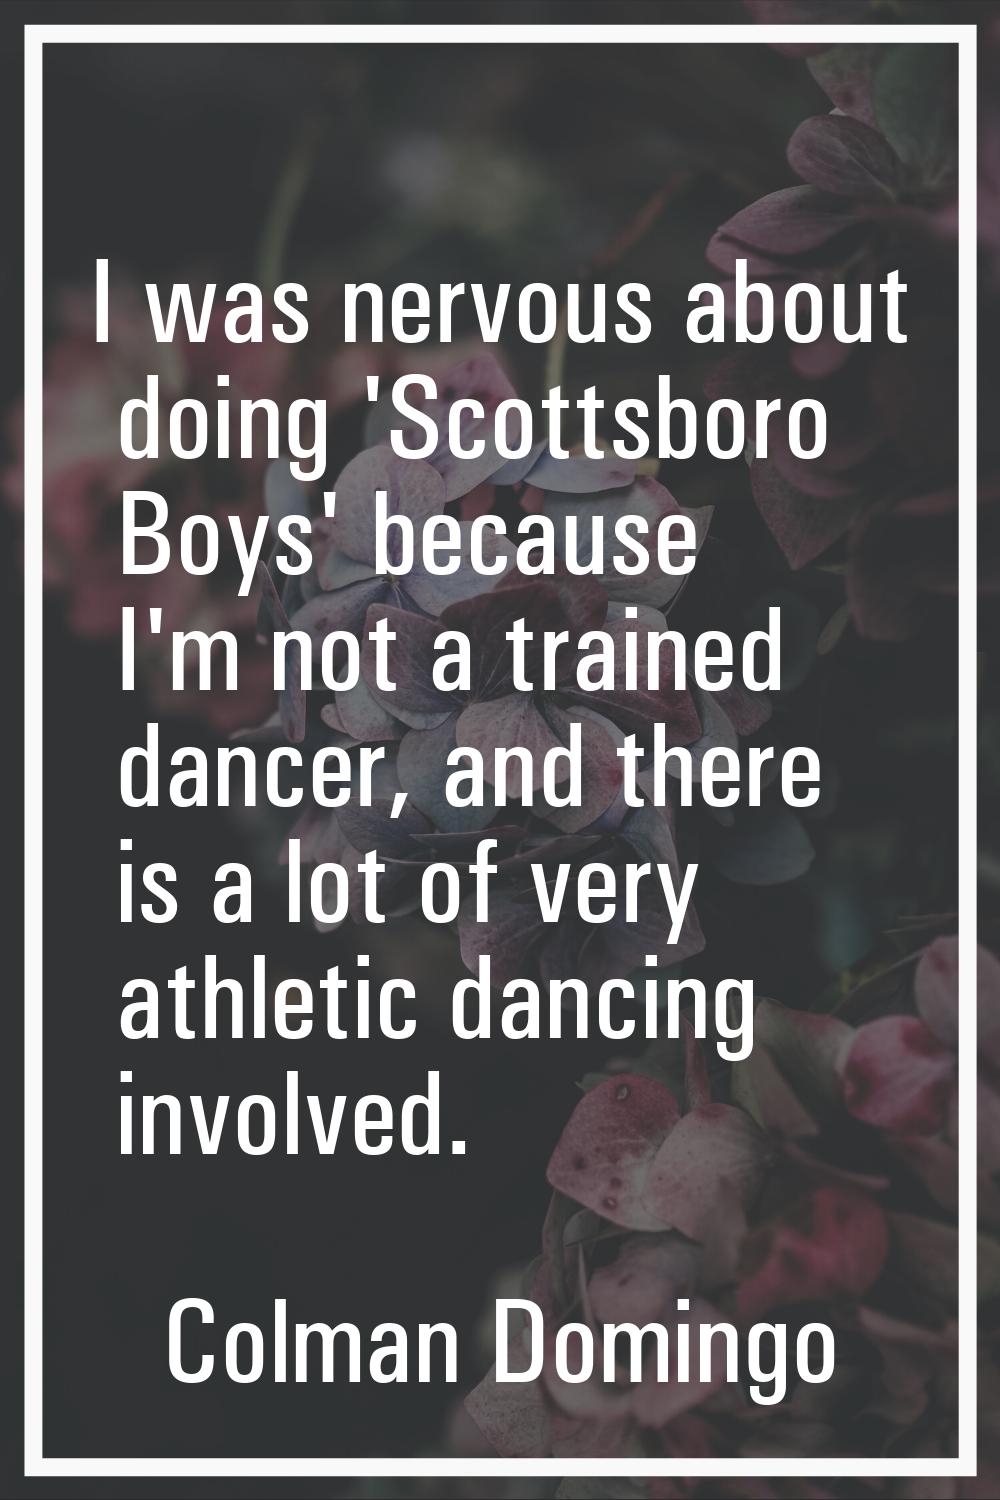 I was nervous about doing 'Scottsboro Boys' because I'm not a trained dancer, and there is a lot of